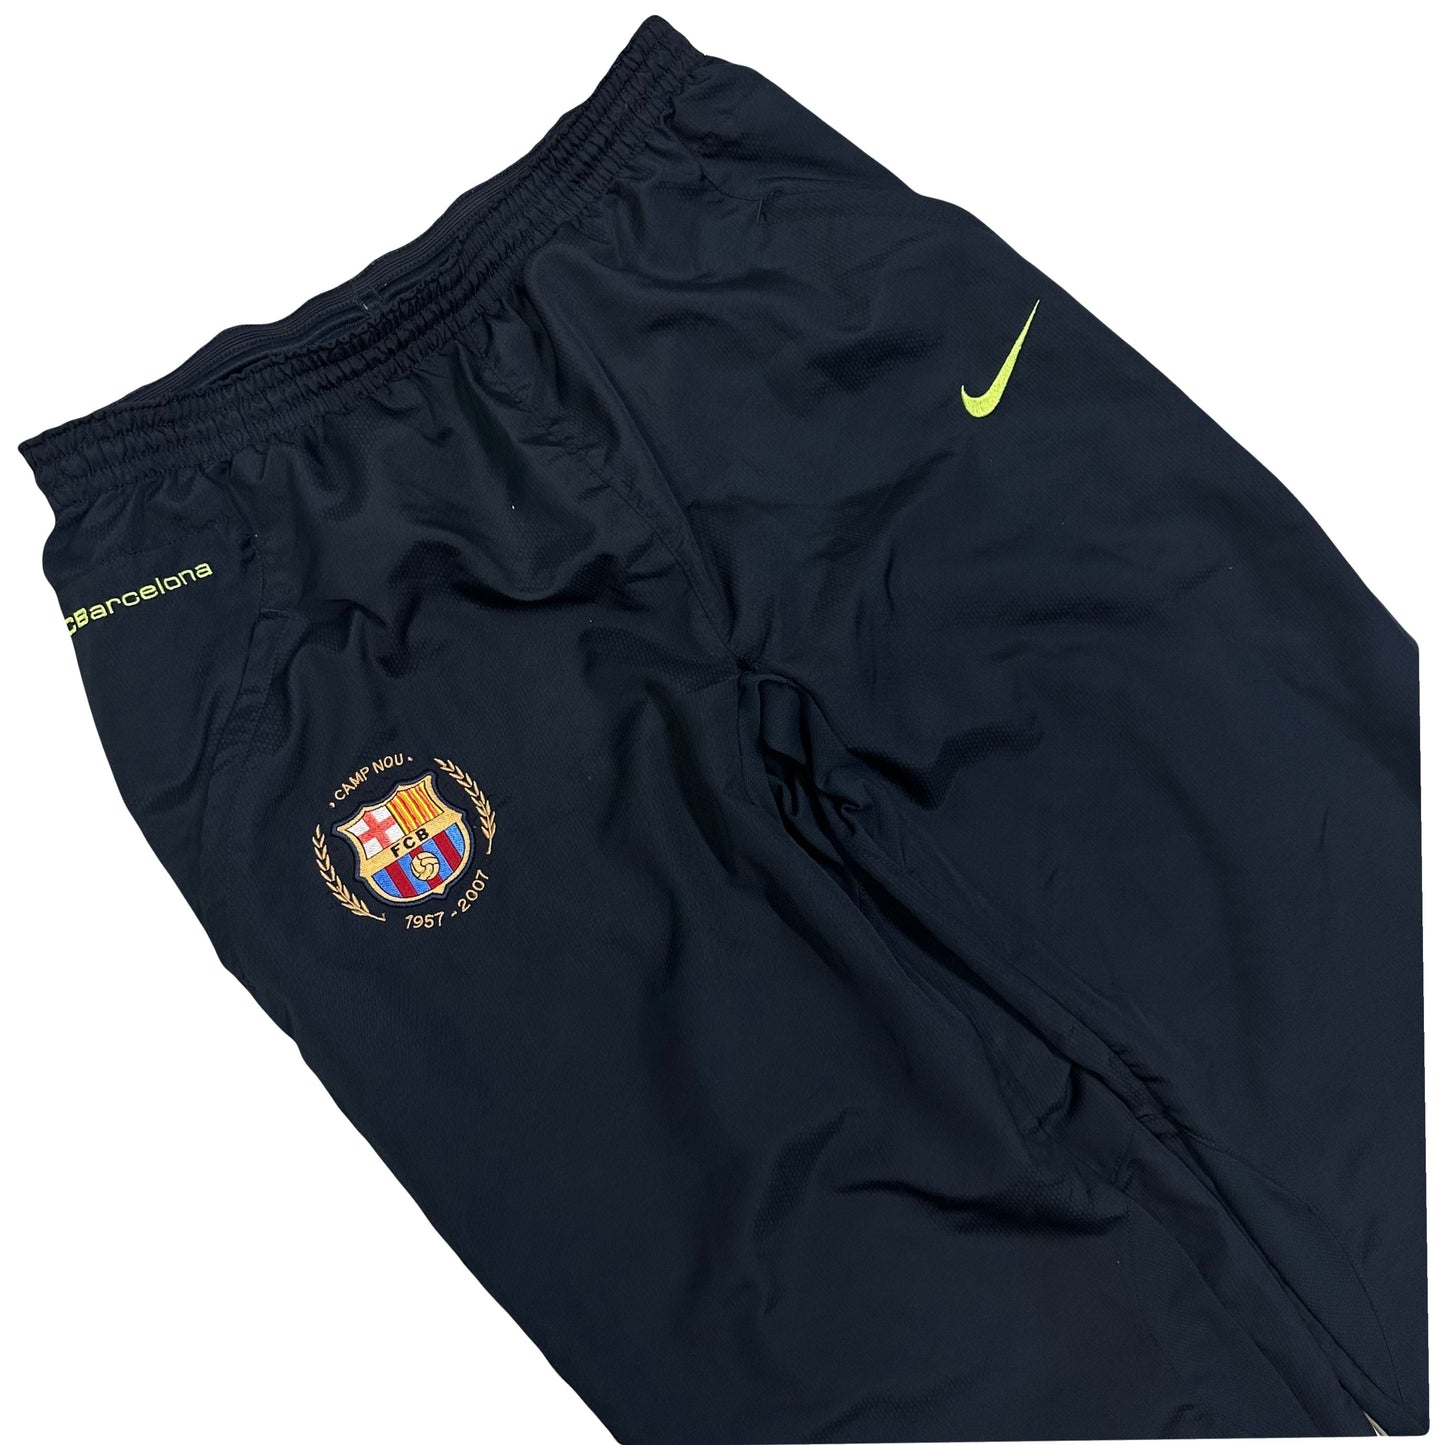 Nike Barcelona 2007 Nou Camp Anniversary Tracksuit Bottoms In Navy ( L )